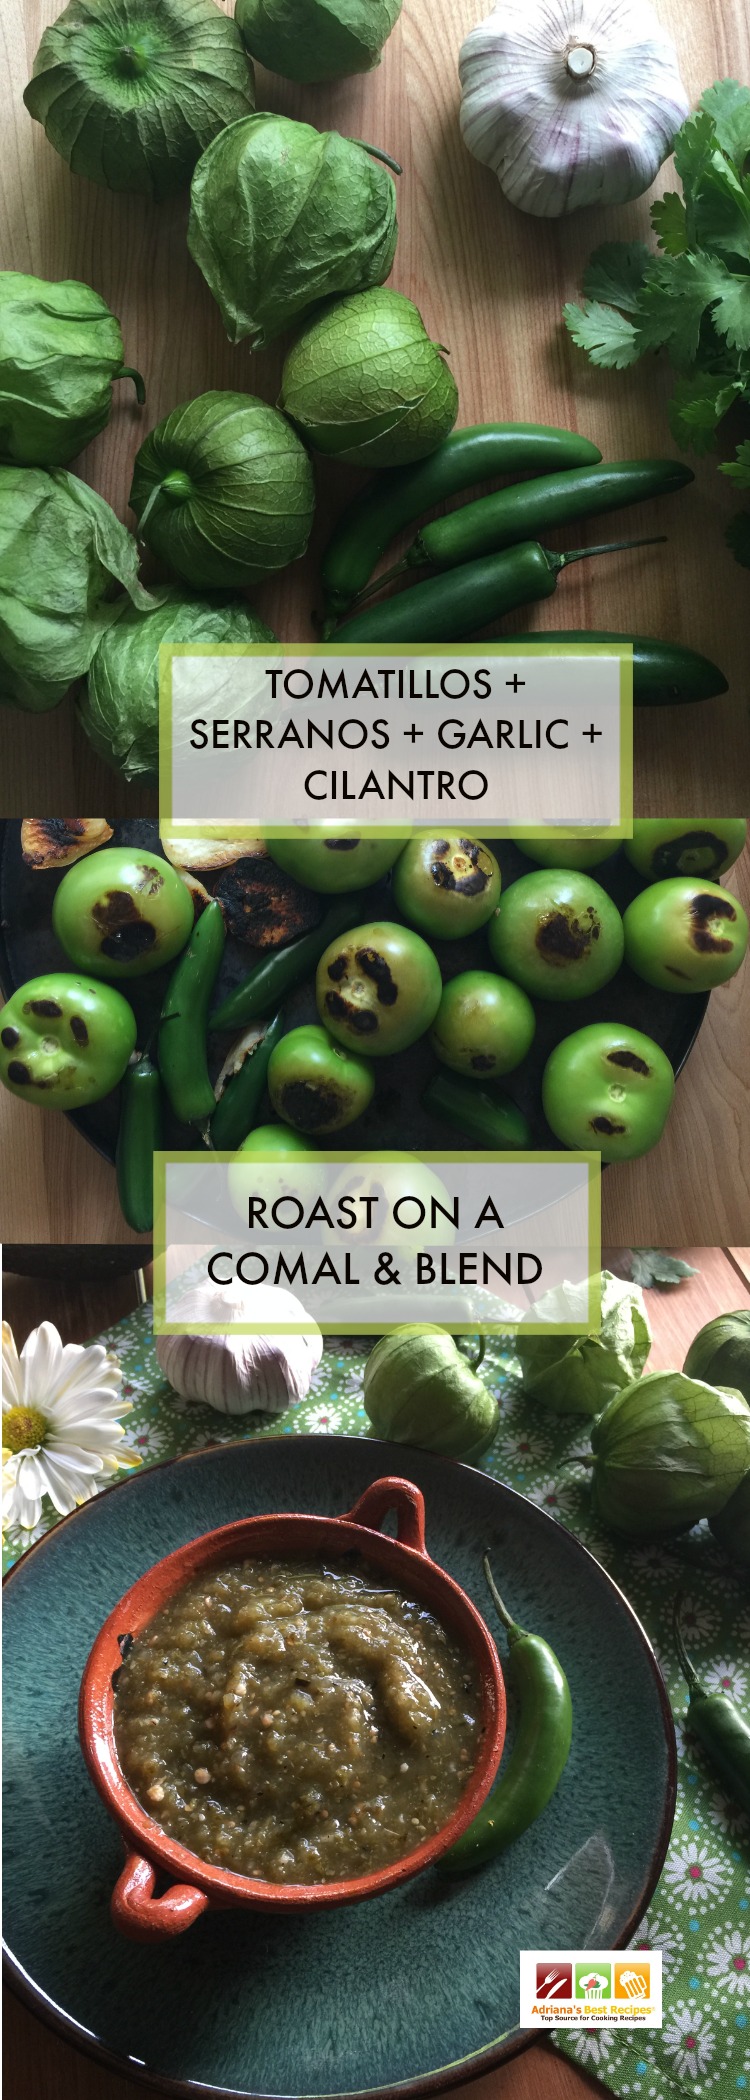 The roasted tomatillo salsa verde is a staple of my Mexican cuisine. Made with green tomatillos, serranos, garlic, and cilantro.